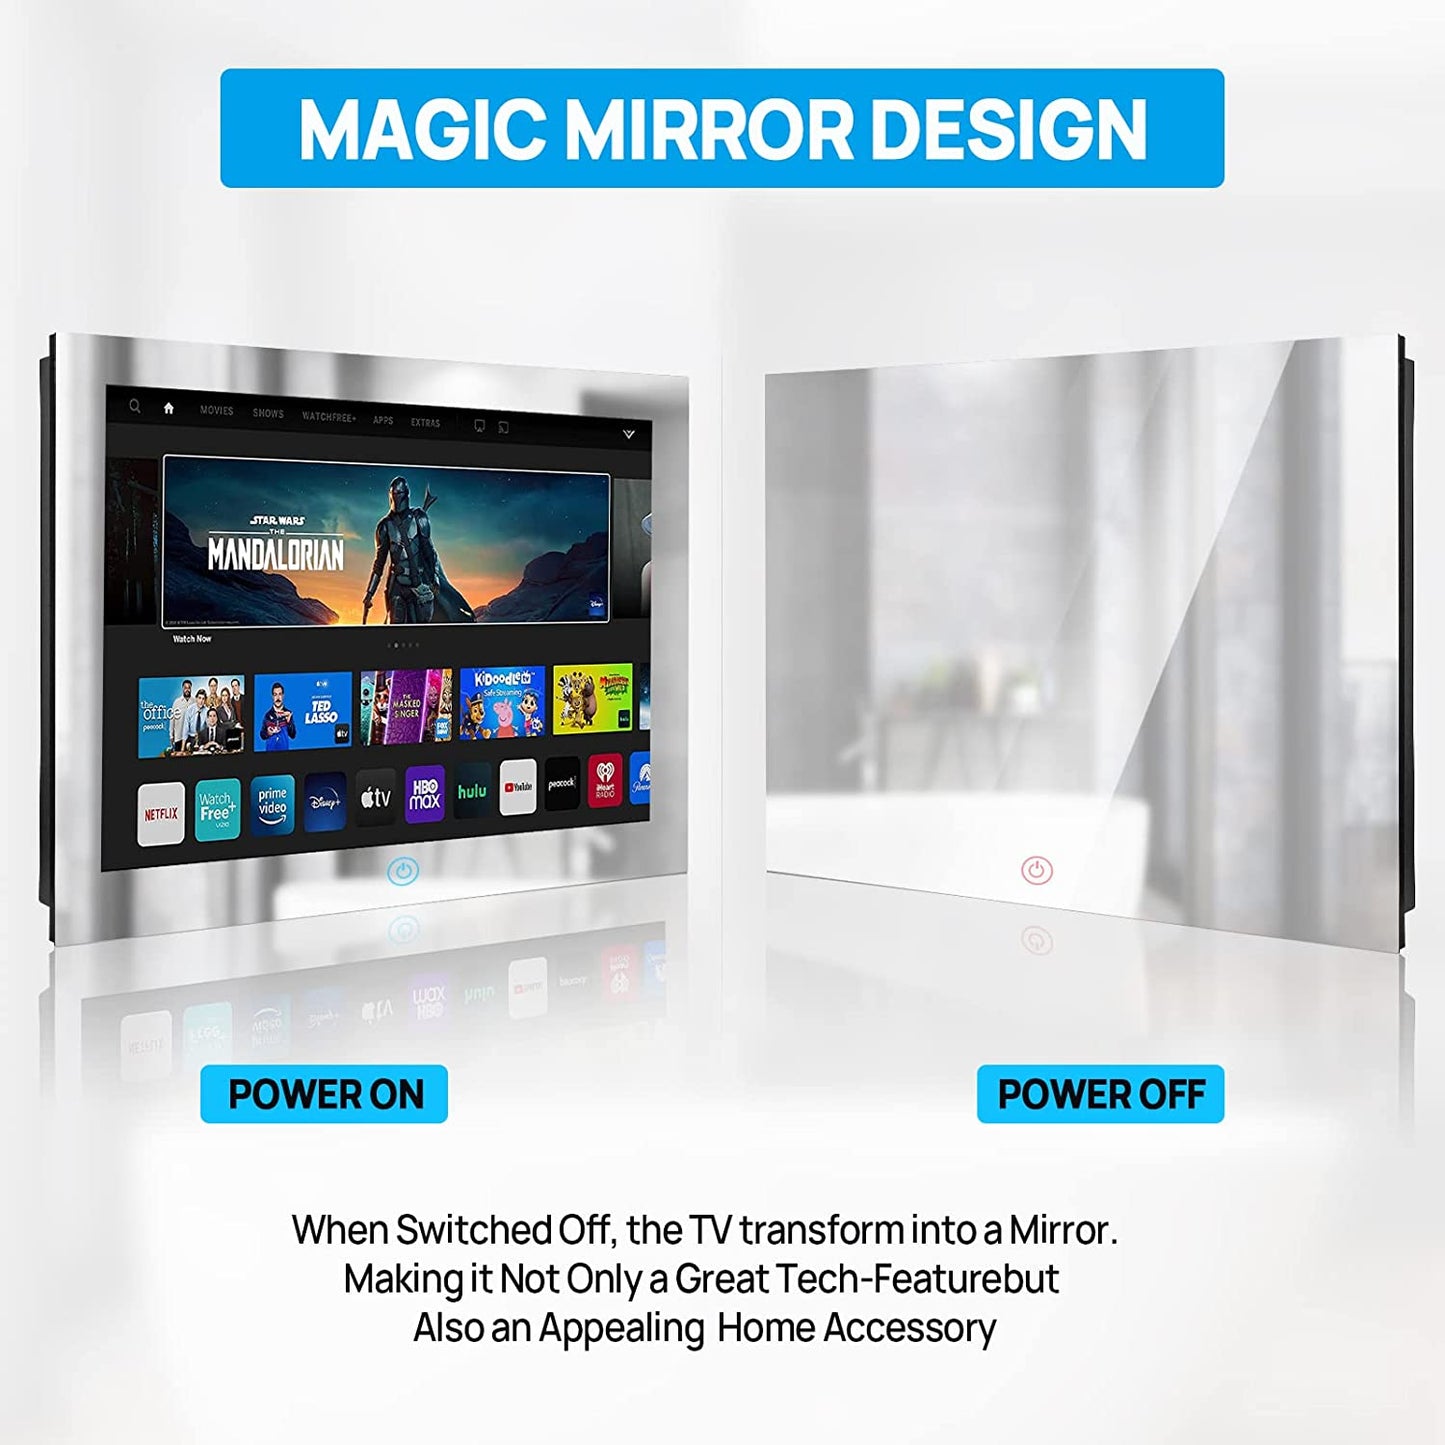 Bathroom Mirror 27-inch TV with Touchscreen IP66 Waterproof Smart Android 11.0 Television Full HD 1080P Built-in ATSC Tuner Wi-Fi Bluetooth (Touch Control, Mirrored Frame)(LEHG270BM-M)